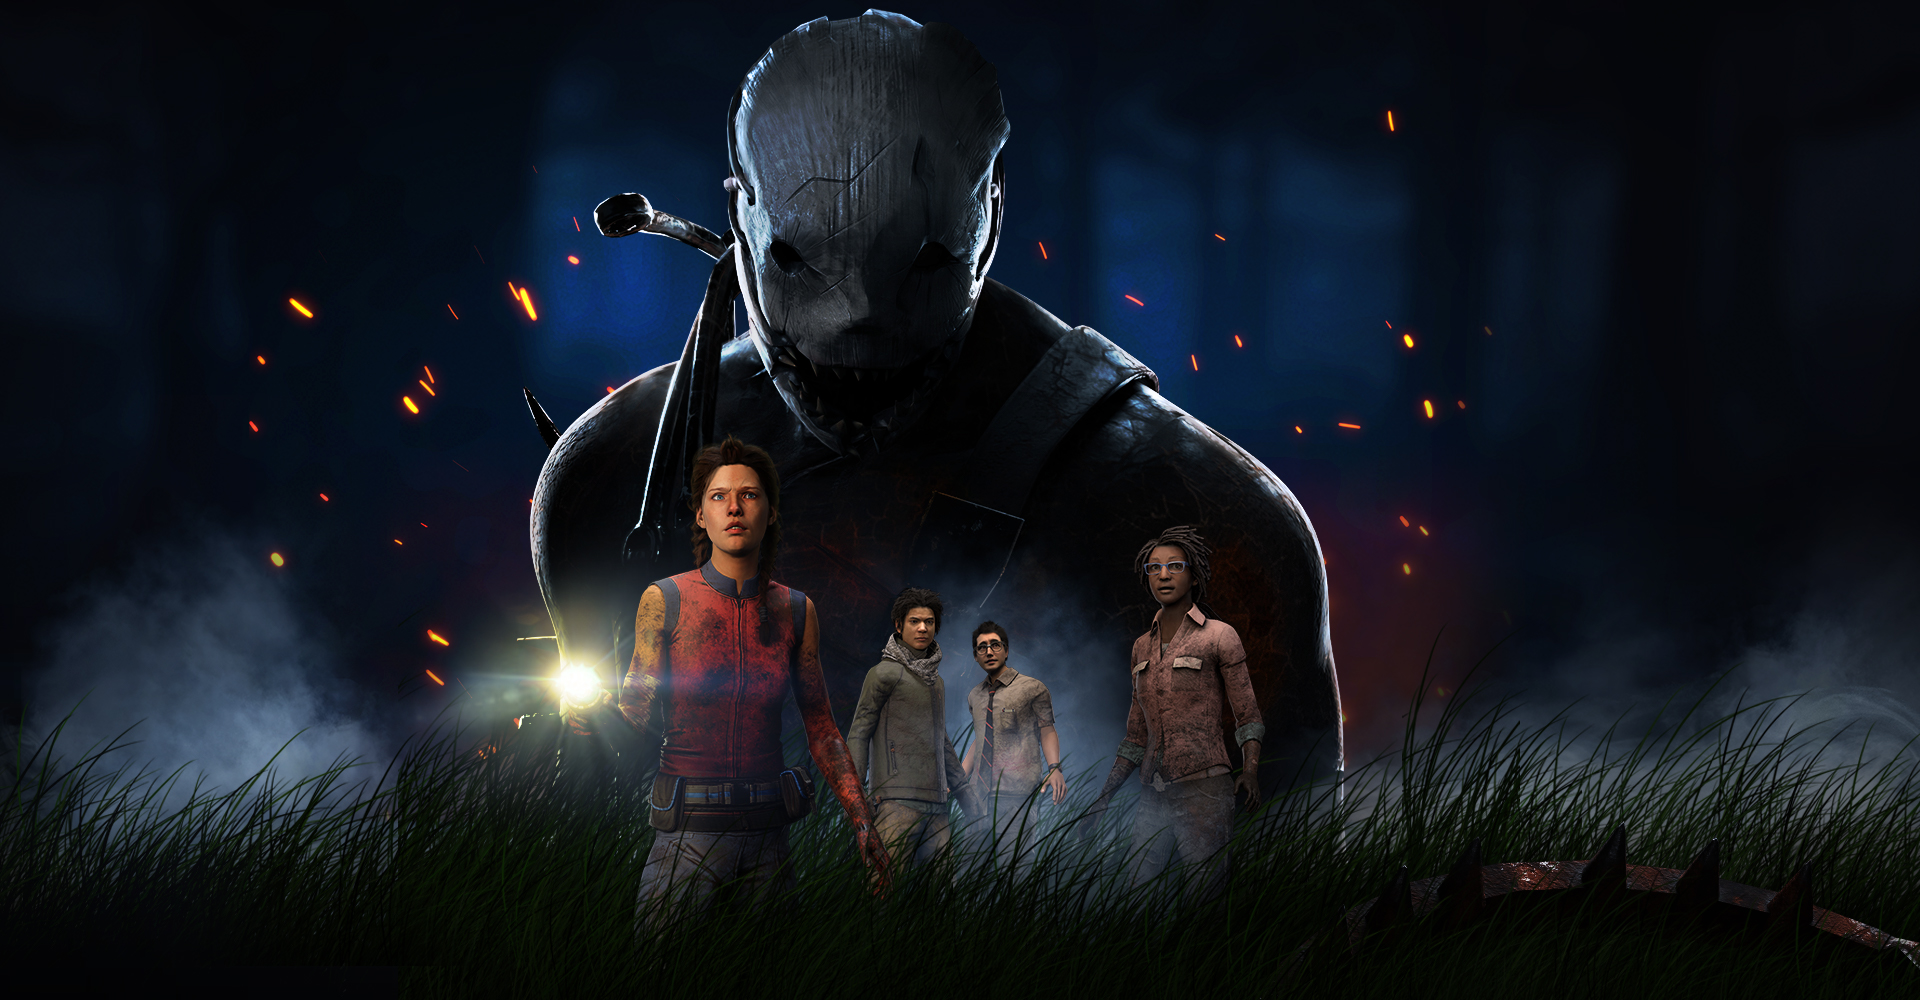 3 Million Downloads for Dead by Daylight on Mobile Phones